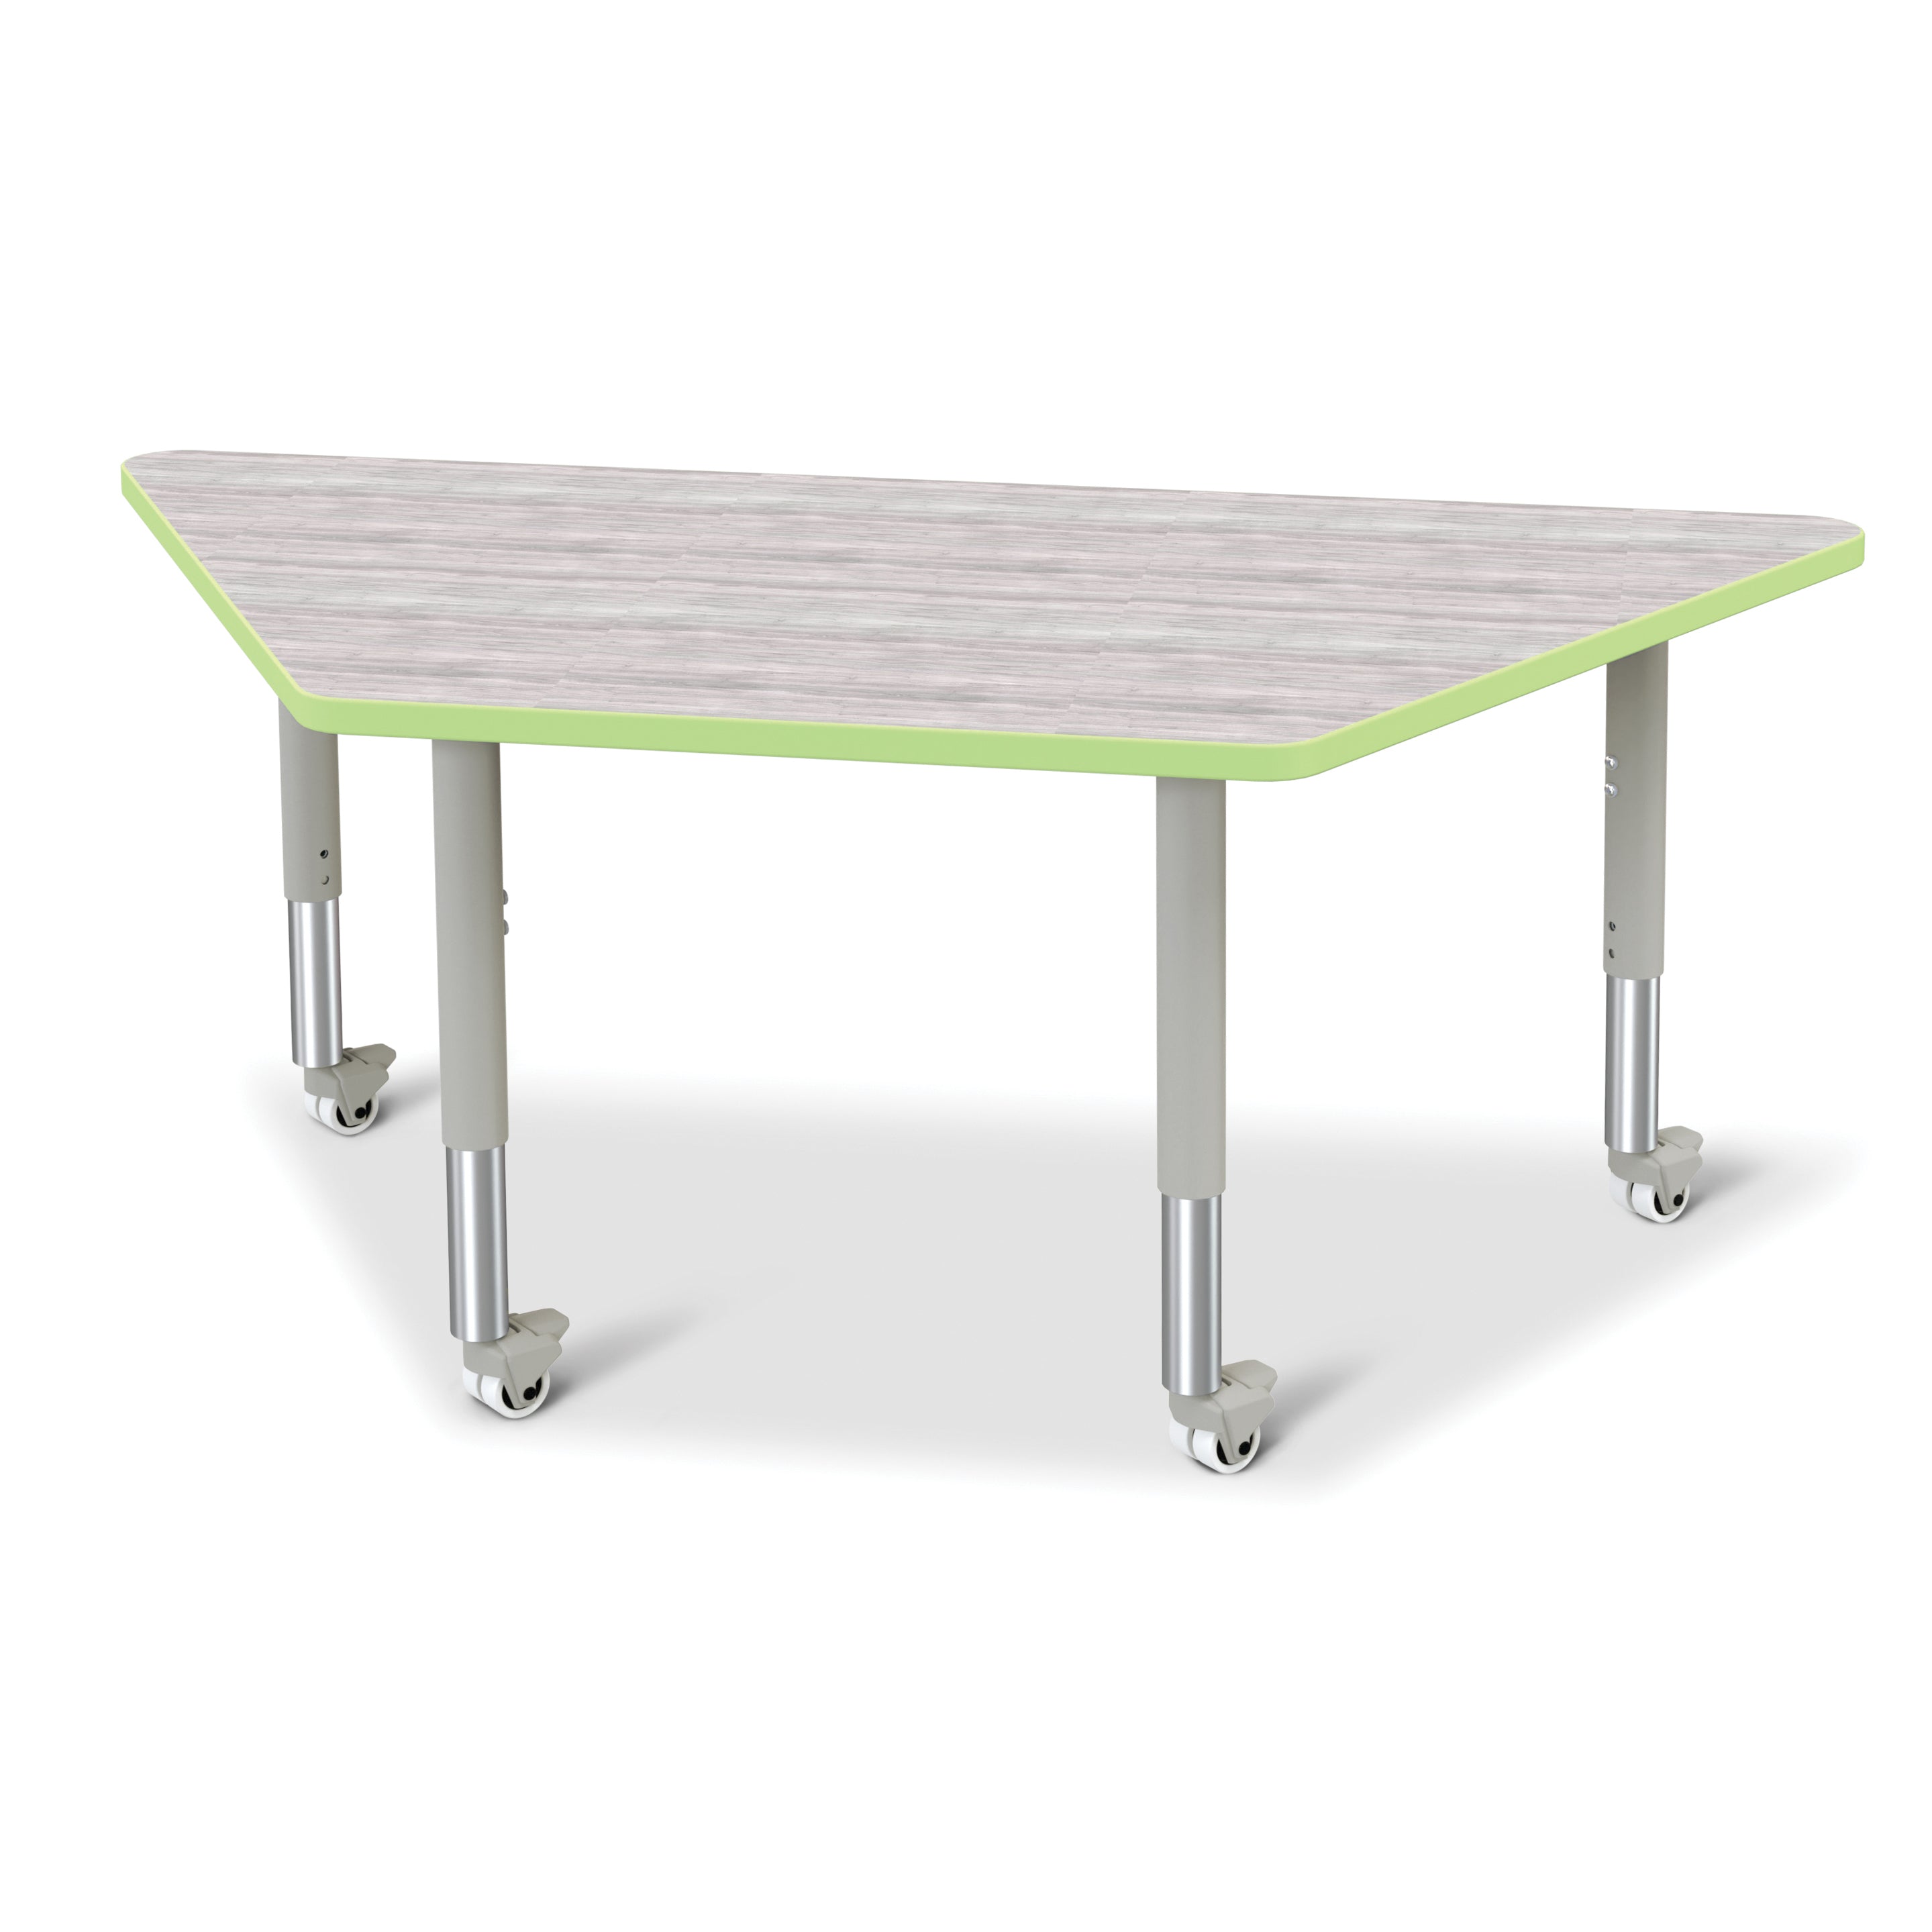 6443JCM451, Berries Trapezoid Activity Table - 30" X 60", Mobile - Driftwood Gray/Key Lime/Gray